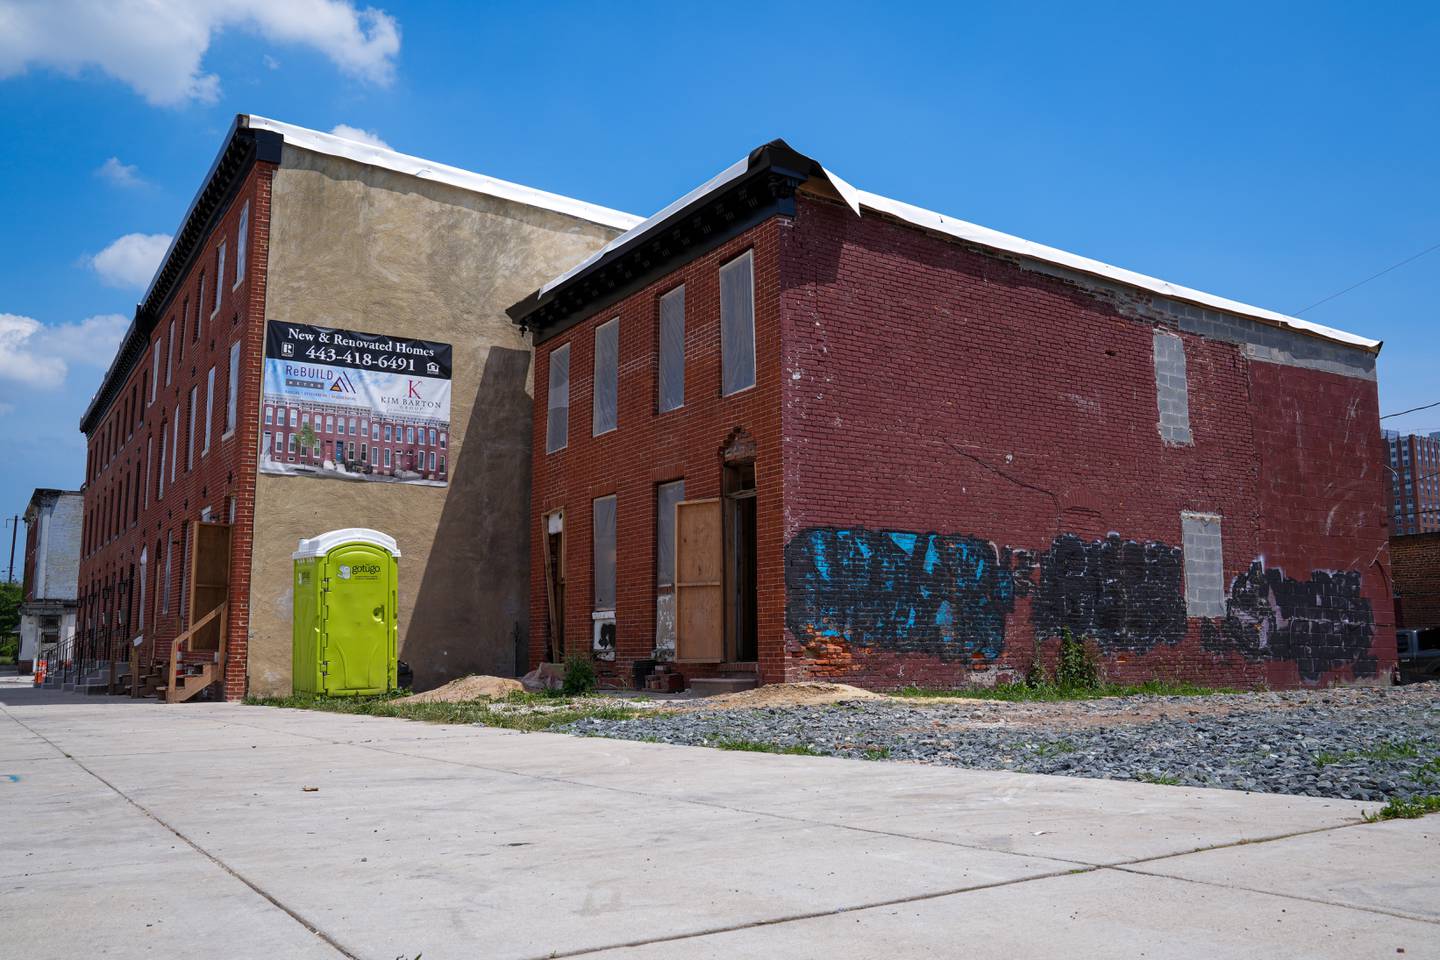 6/8/22—A row of vacant homes on the 1700 block of E. Biddle street are being renovated by Rebuild Metro.